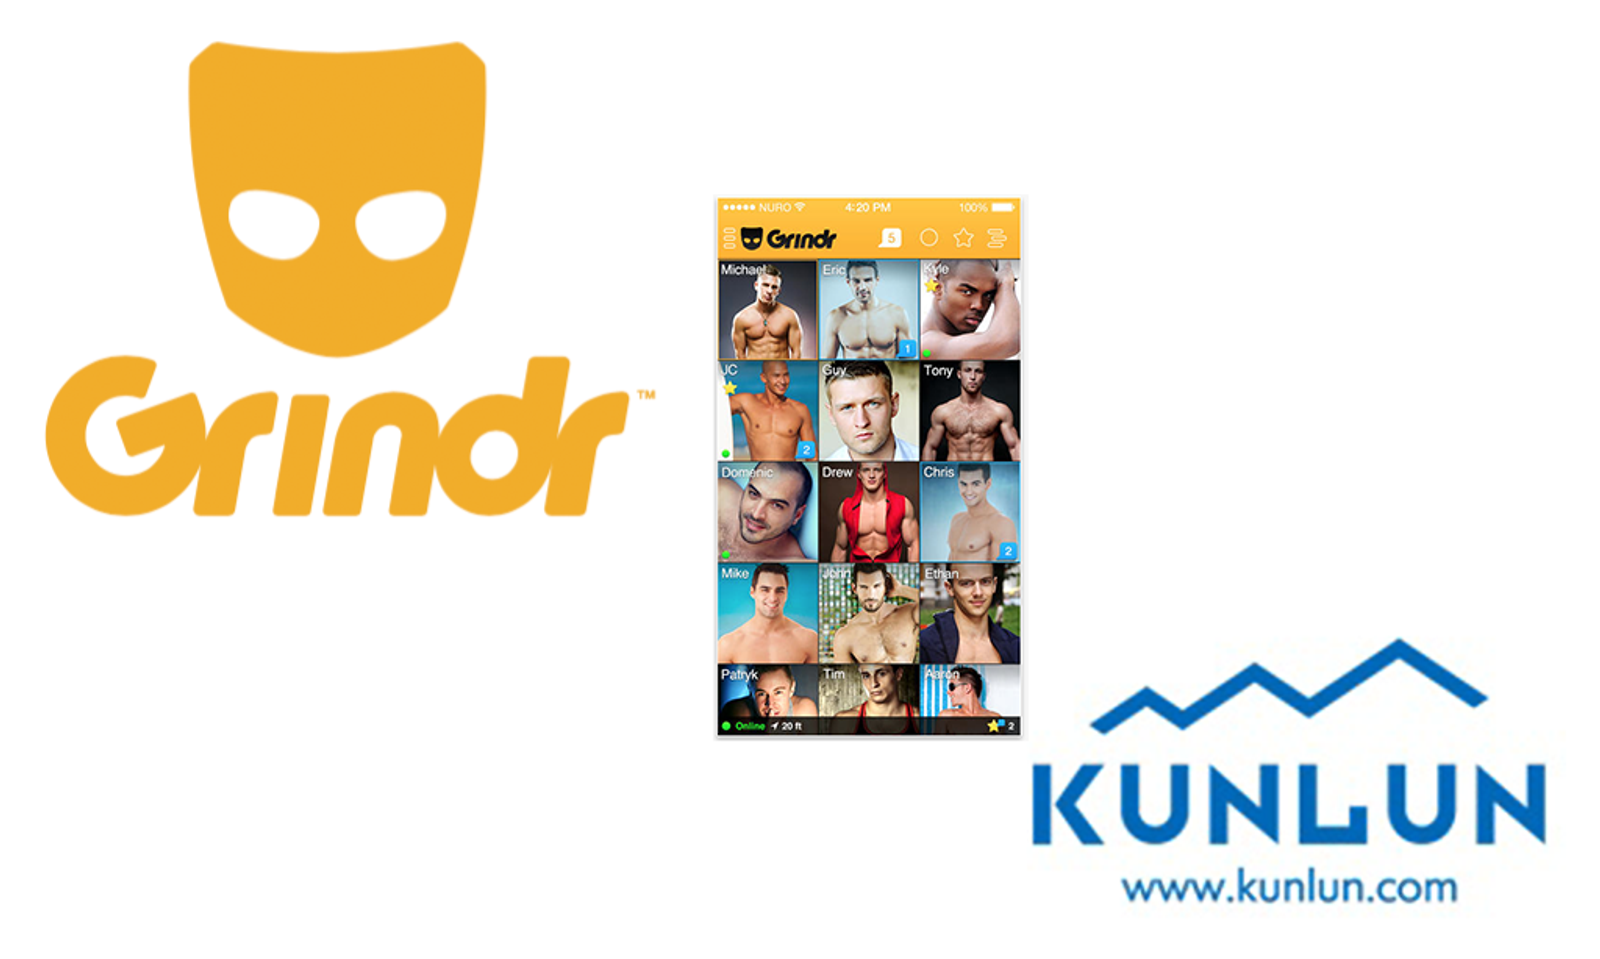 Who Knows What the Chinese Will Do With Your Grindr Info?